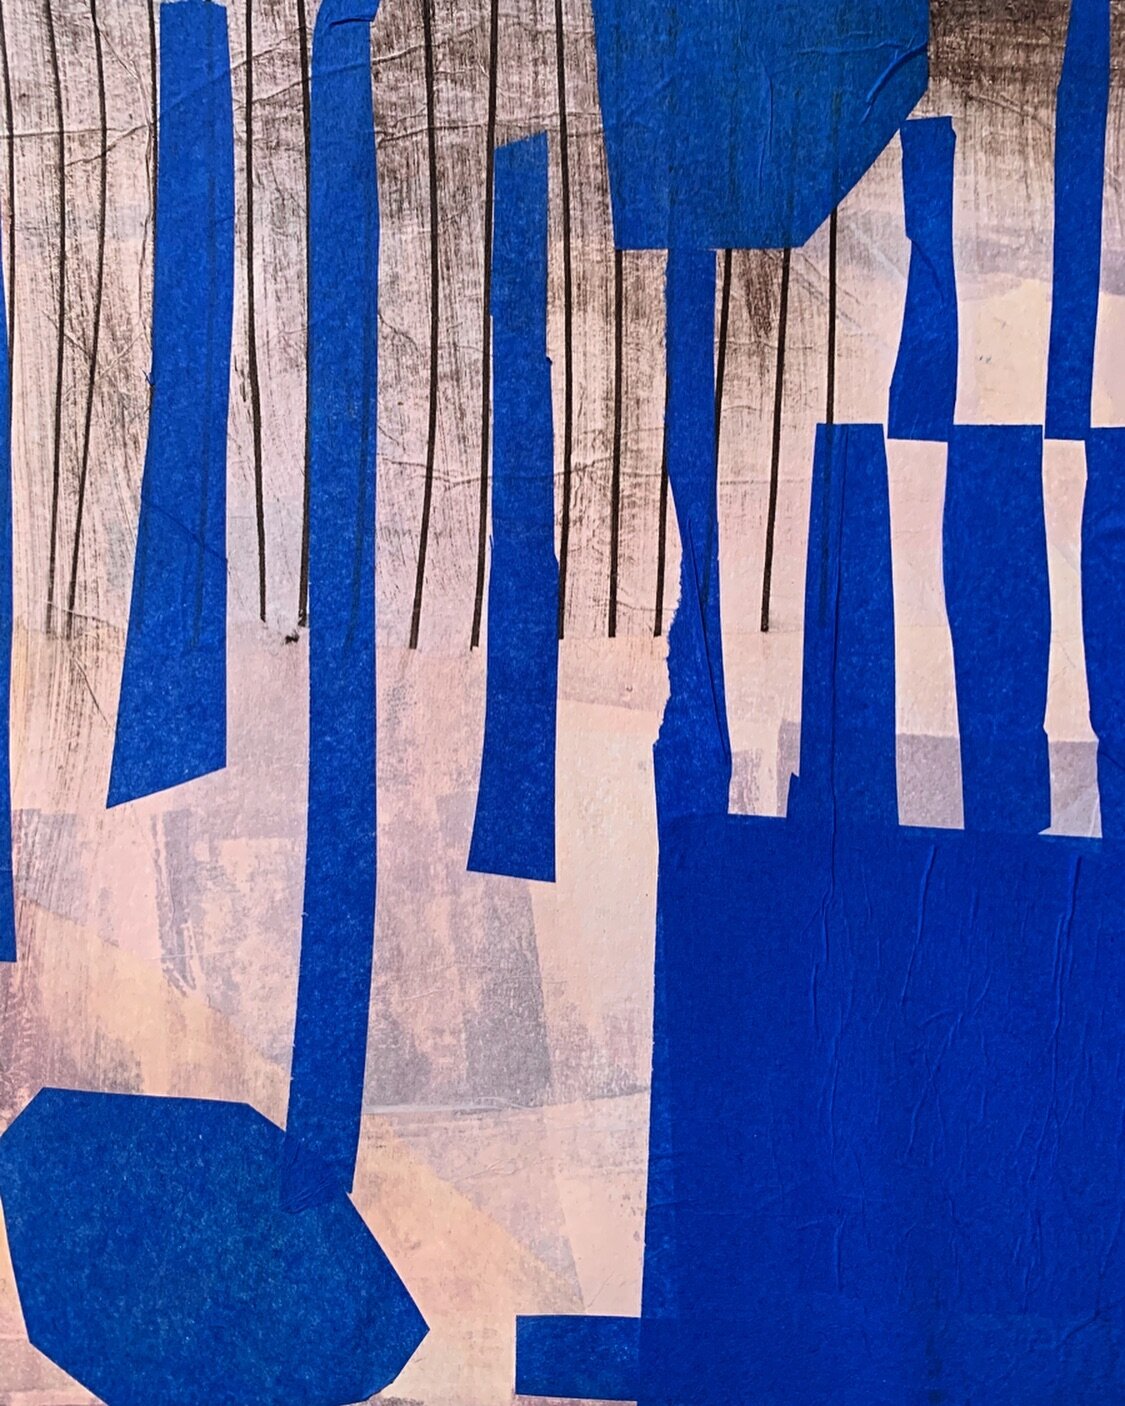 WIP -Monotype and Collage in Royal Blue -just can&rsquo;t let go of this colour! 
&bull;
&bull;
&bull;
&bull;
&bull;
#artwork #art #abstractcollage #collageartwork 
#monotypeprintmaking #mixedmediacollage 
#abstractart #abstractprintmaking 
#artforsa